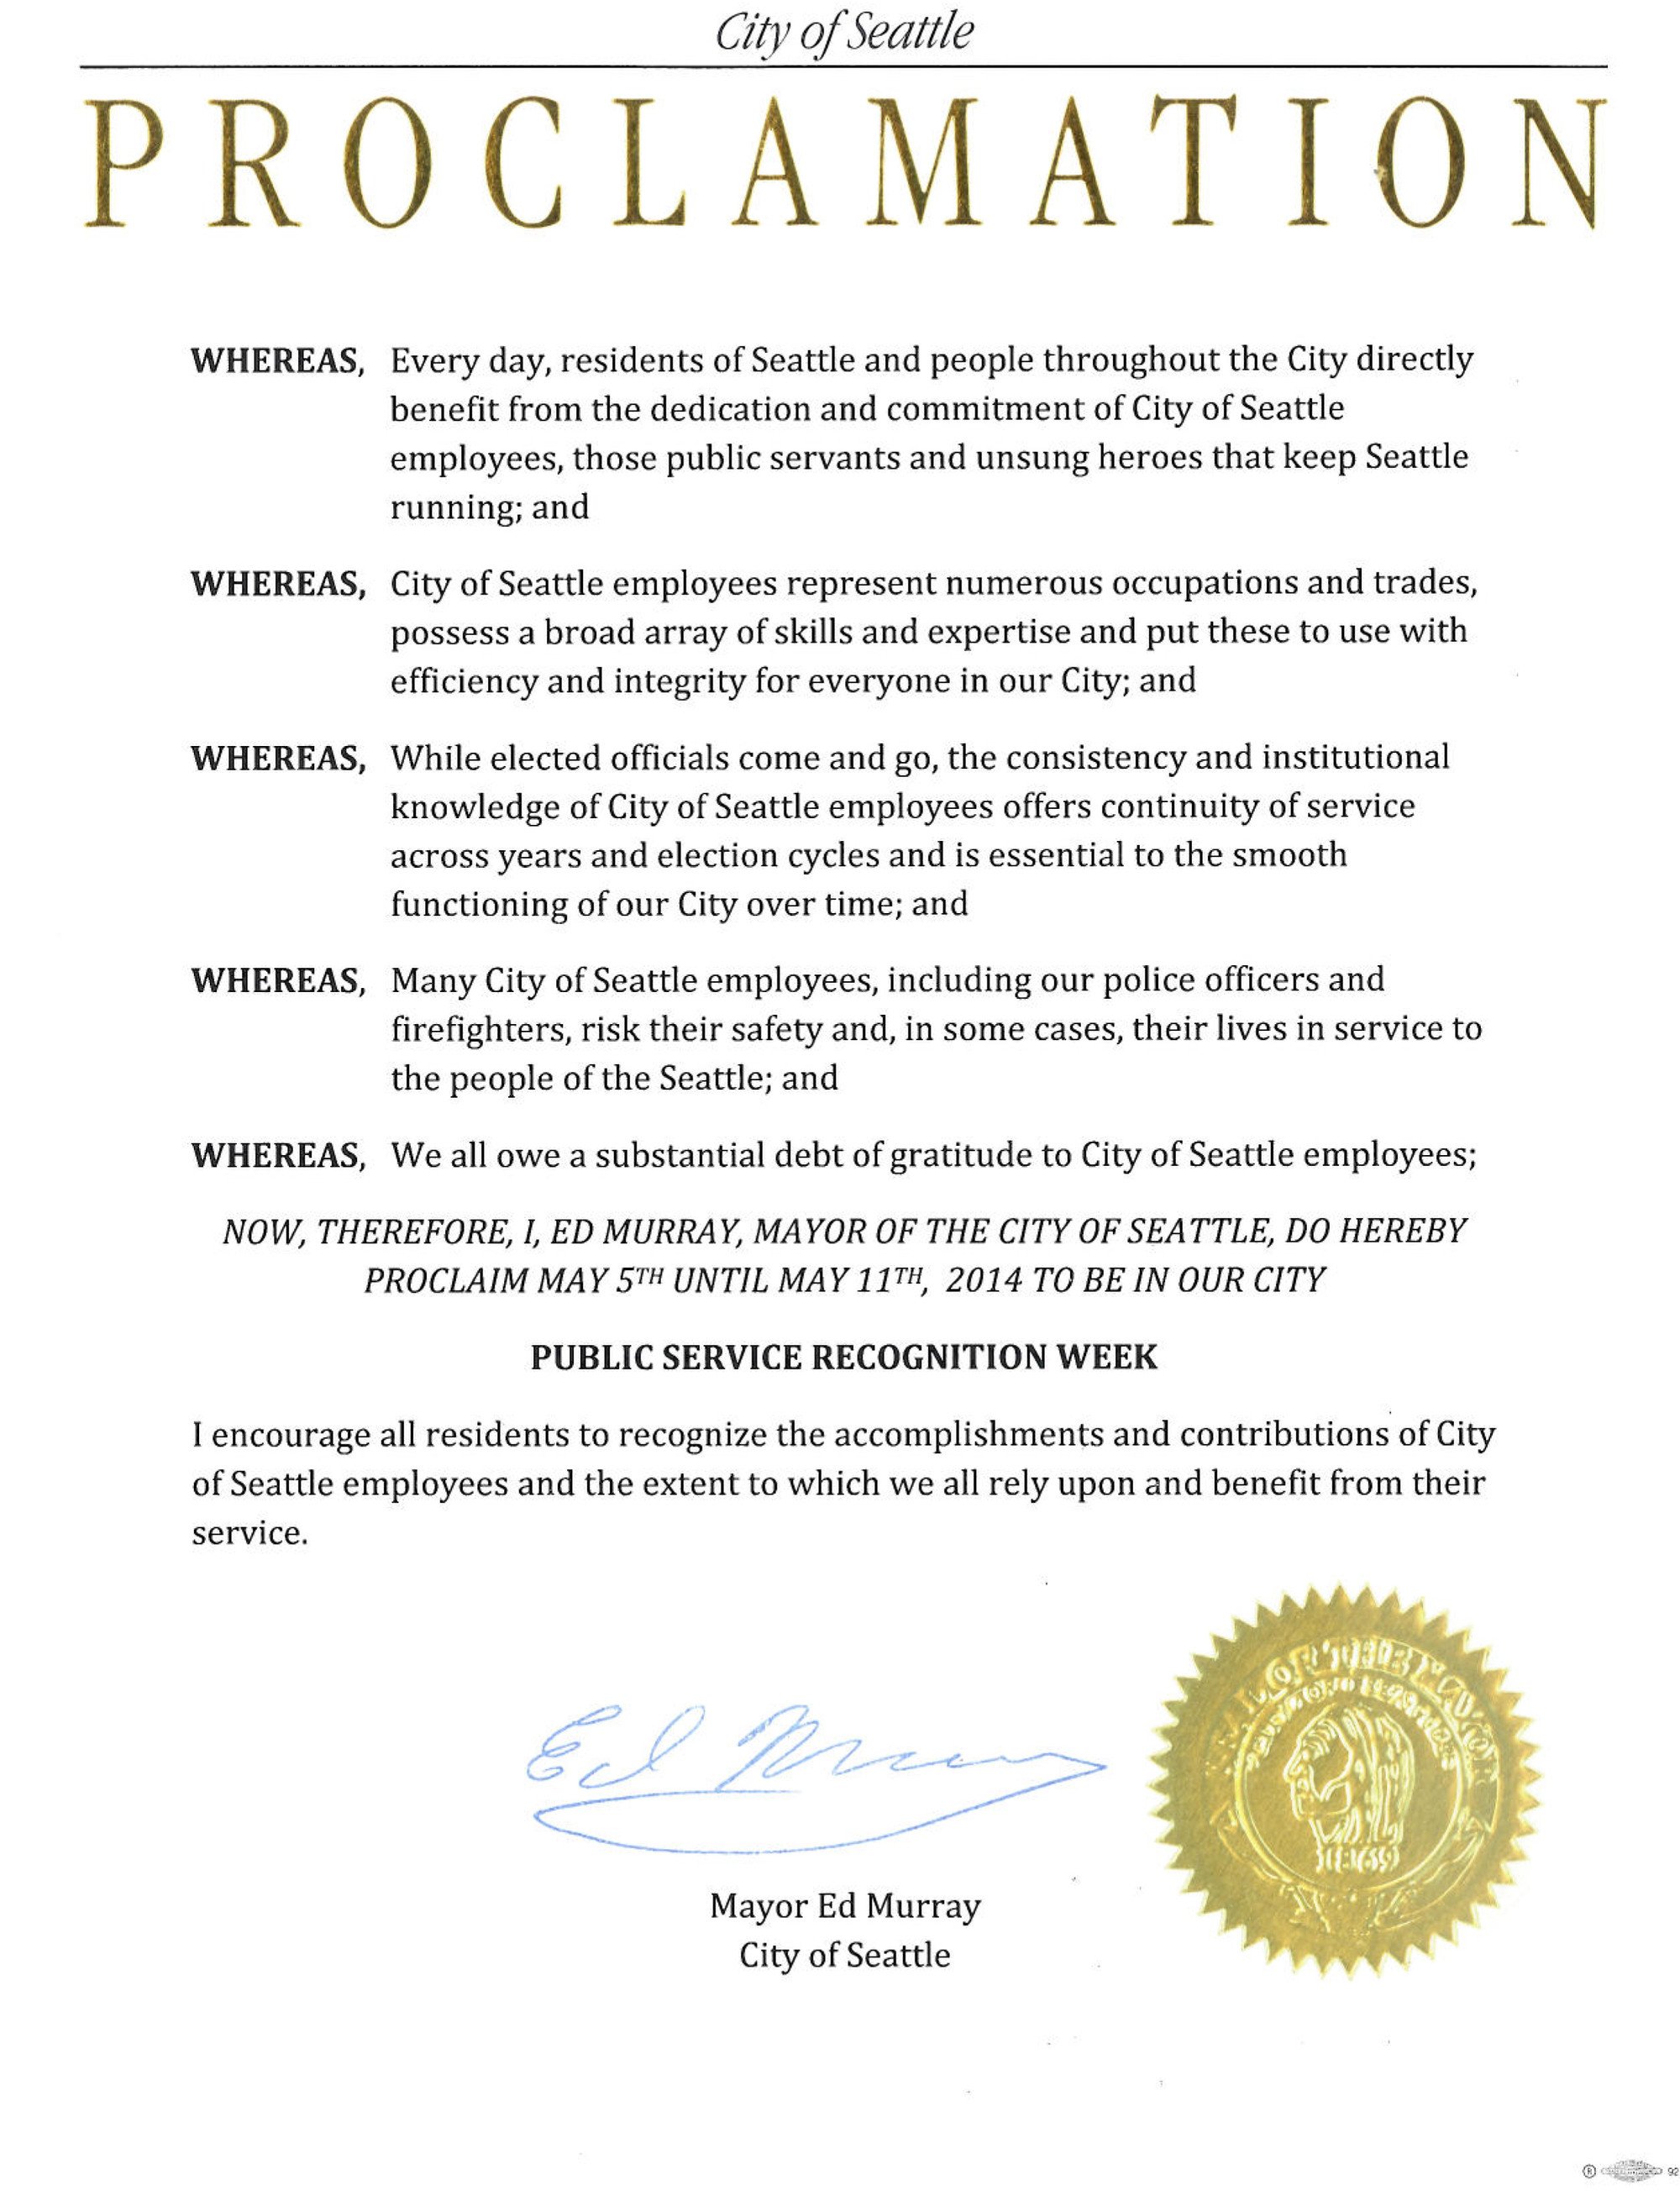 Mayoral Proclamation Template Proclamations Archives Mayor Murray